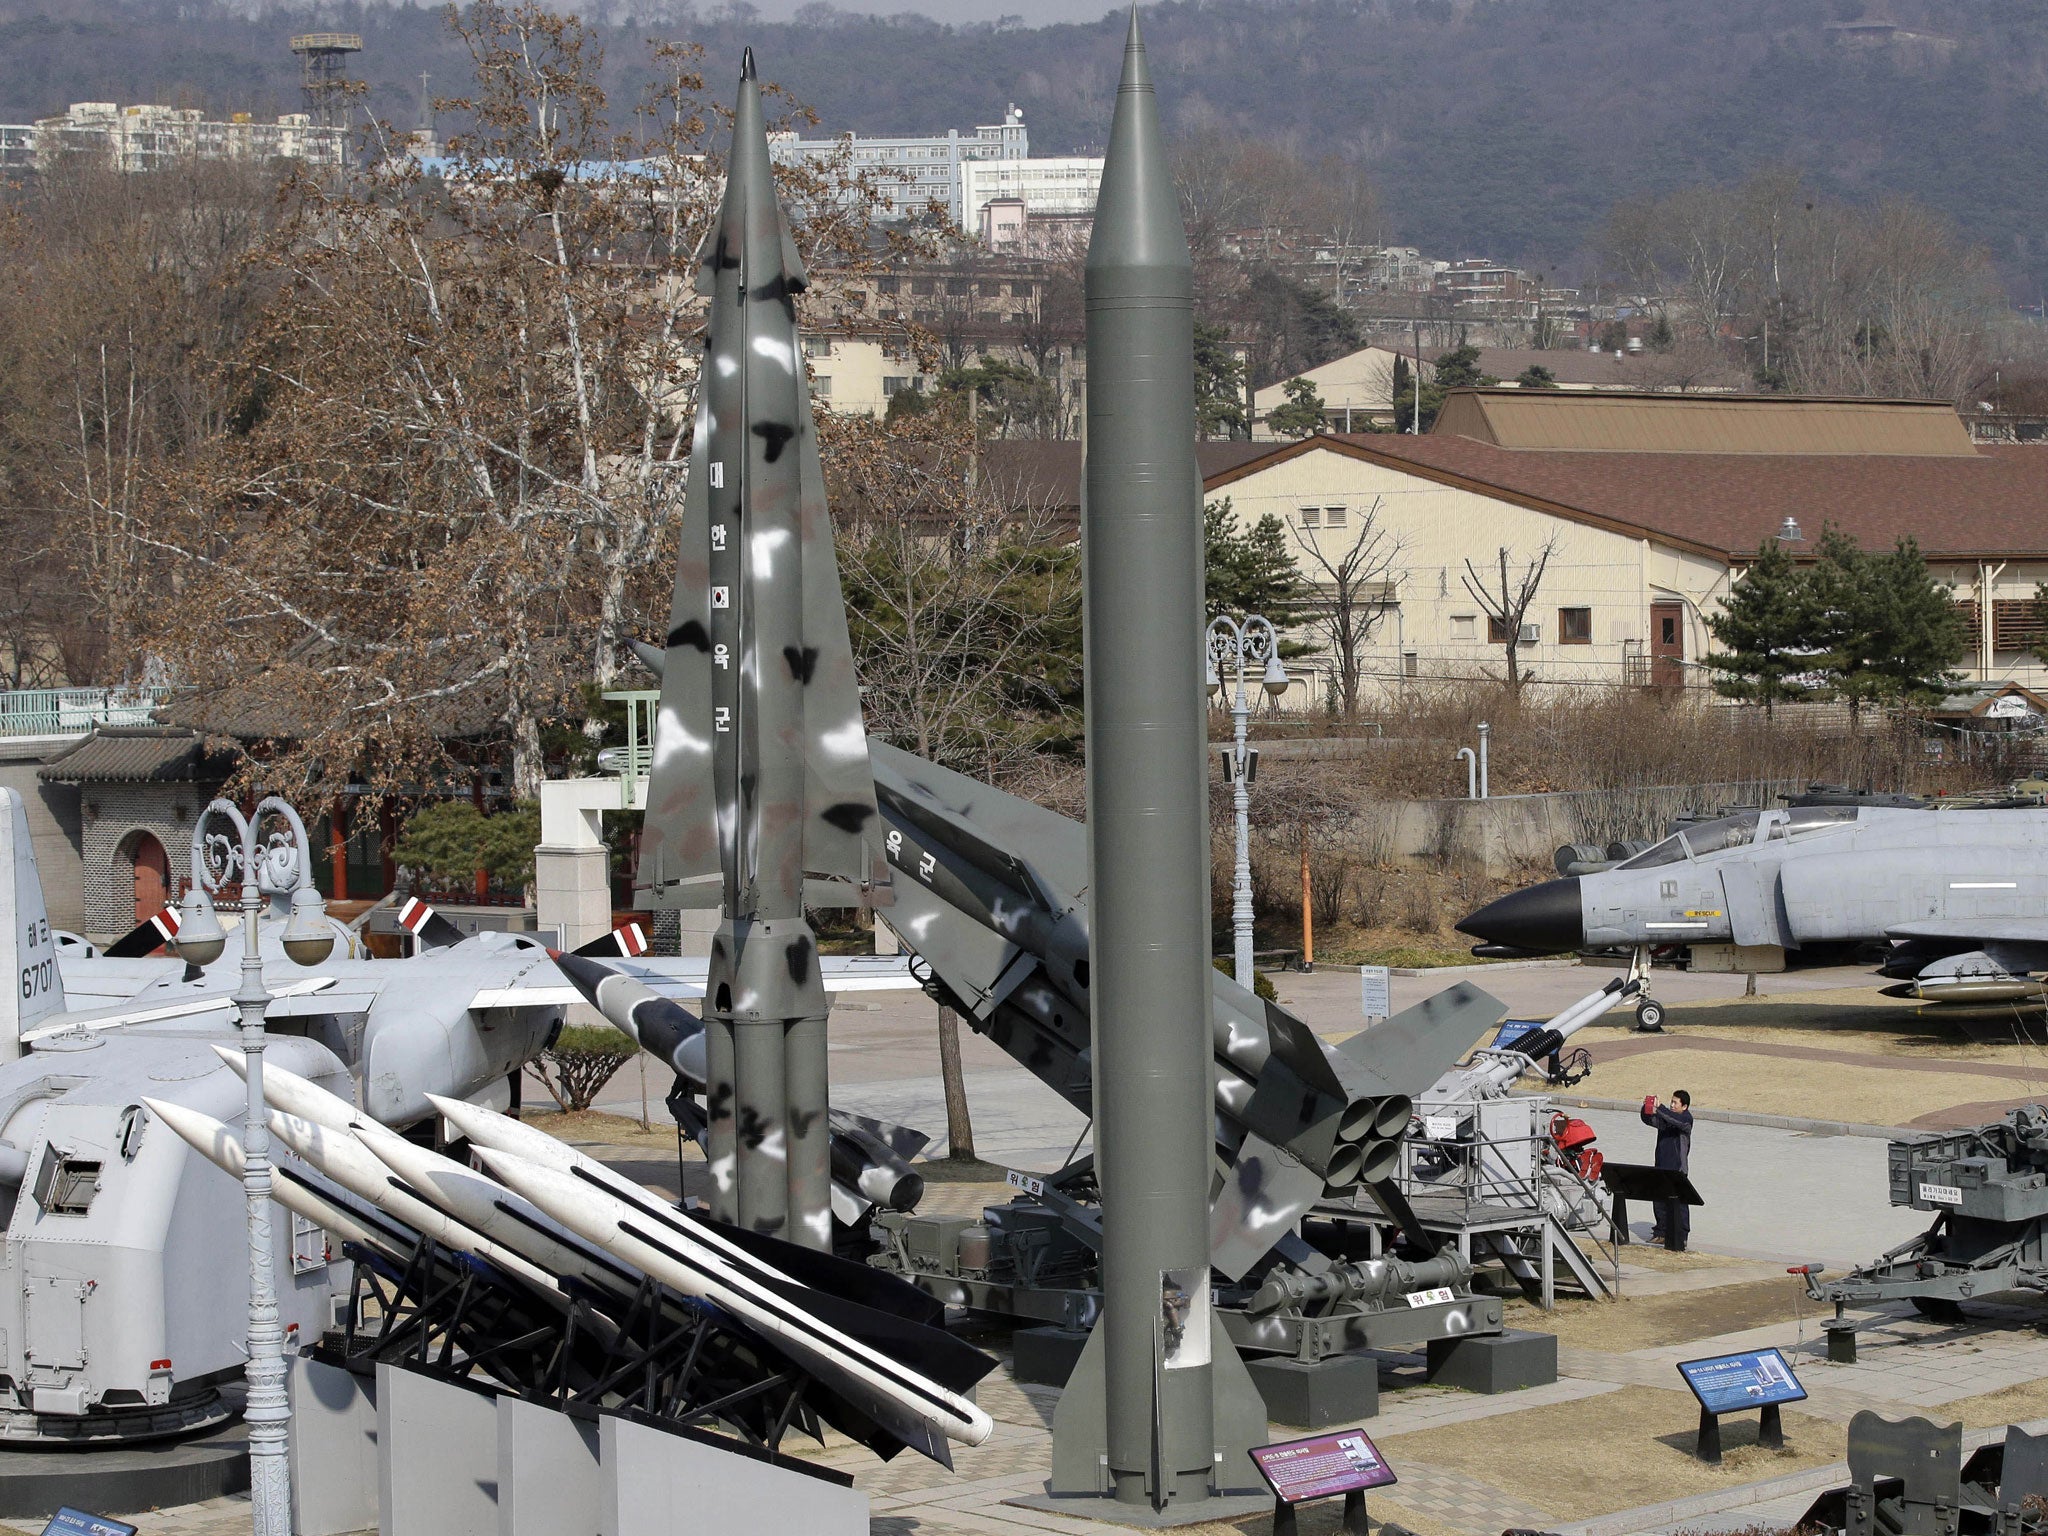 A mock Scud-B missile of North Korea, center, and other South Korean missiles are displayed at the Korea War Memorial Museum in Seoul, South Korea, Monday, March 3, 2014.